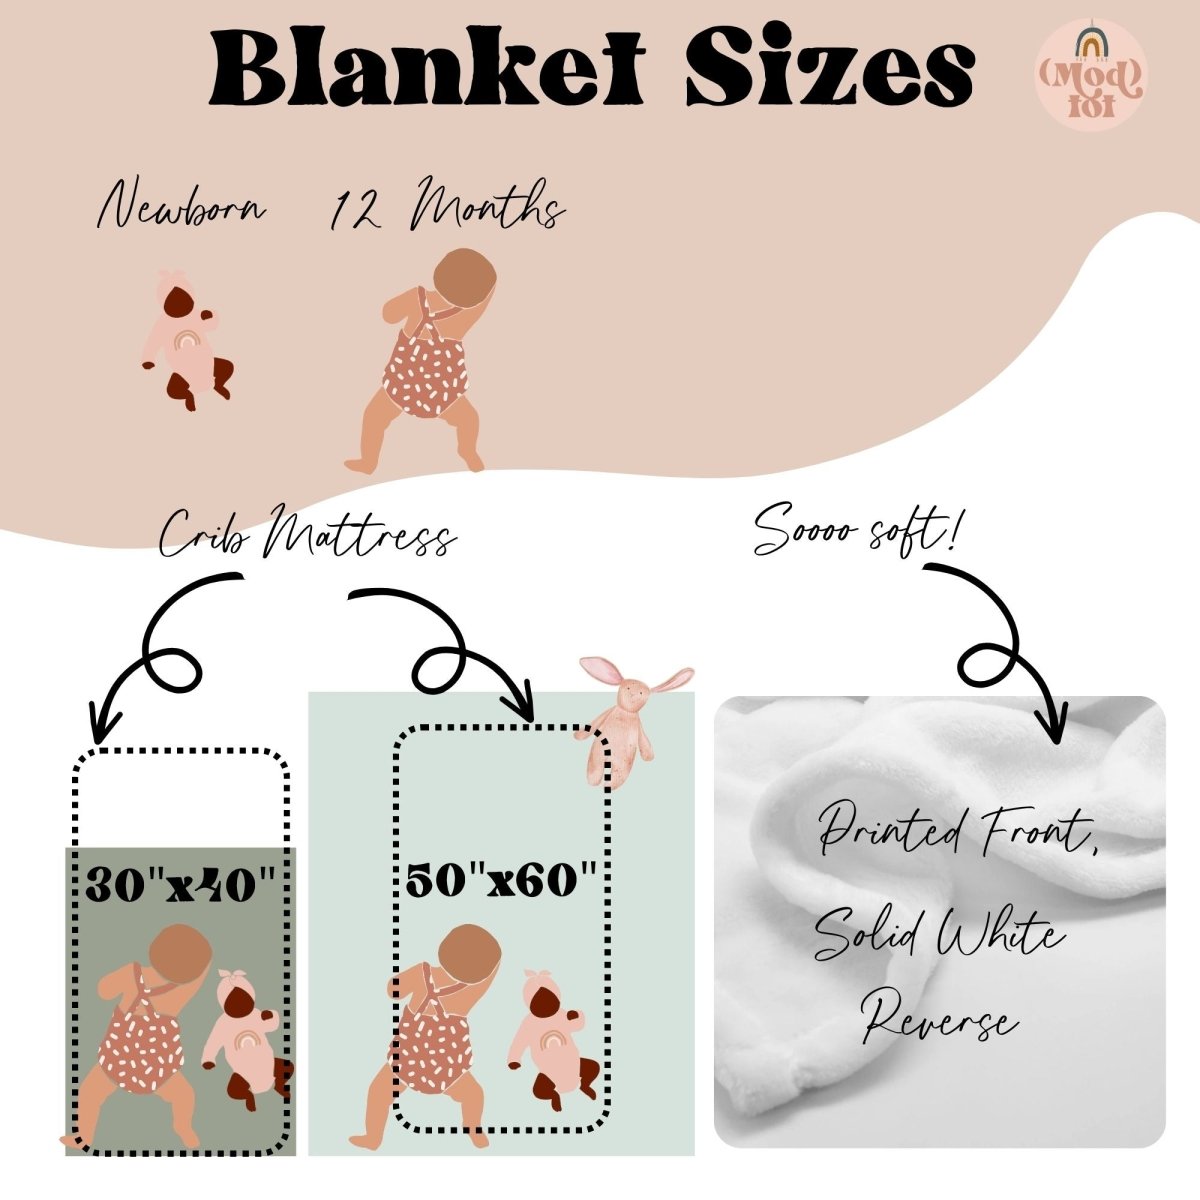 Floral Moon Personalized Minky Blanket - Floral Moon, gender_girl, Personalized_Yes